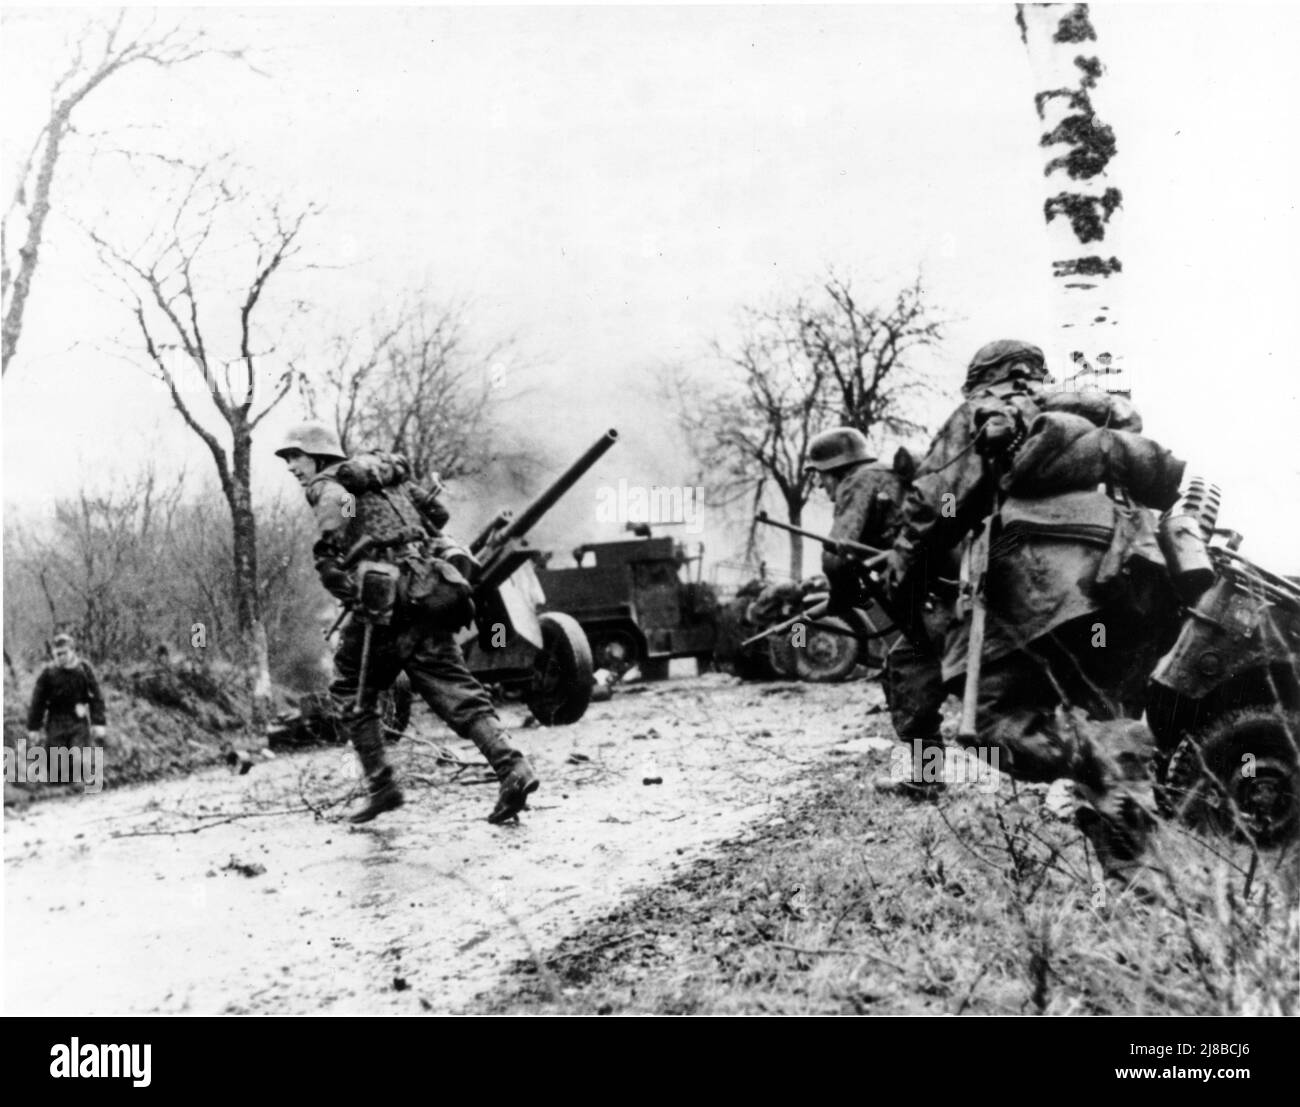 German troops advancing past abandoned American equipment during the Battle of the Bulge. Stock Photo